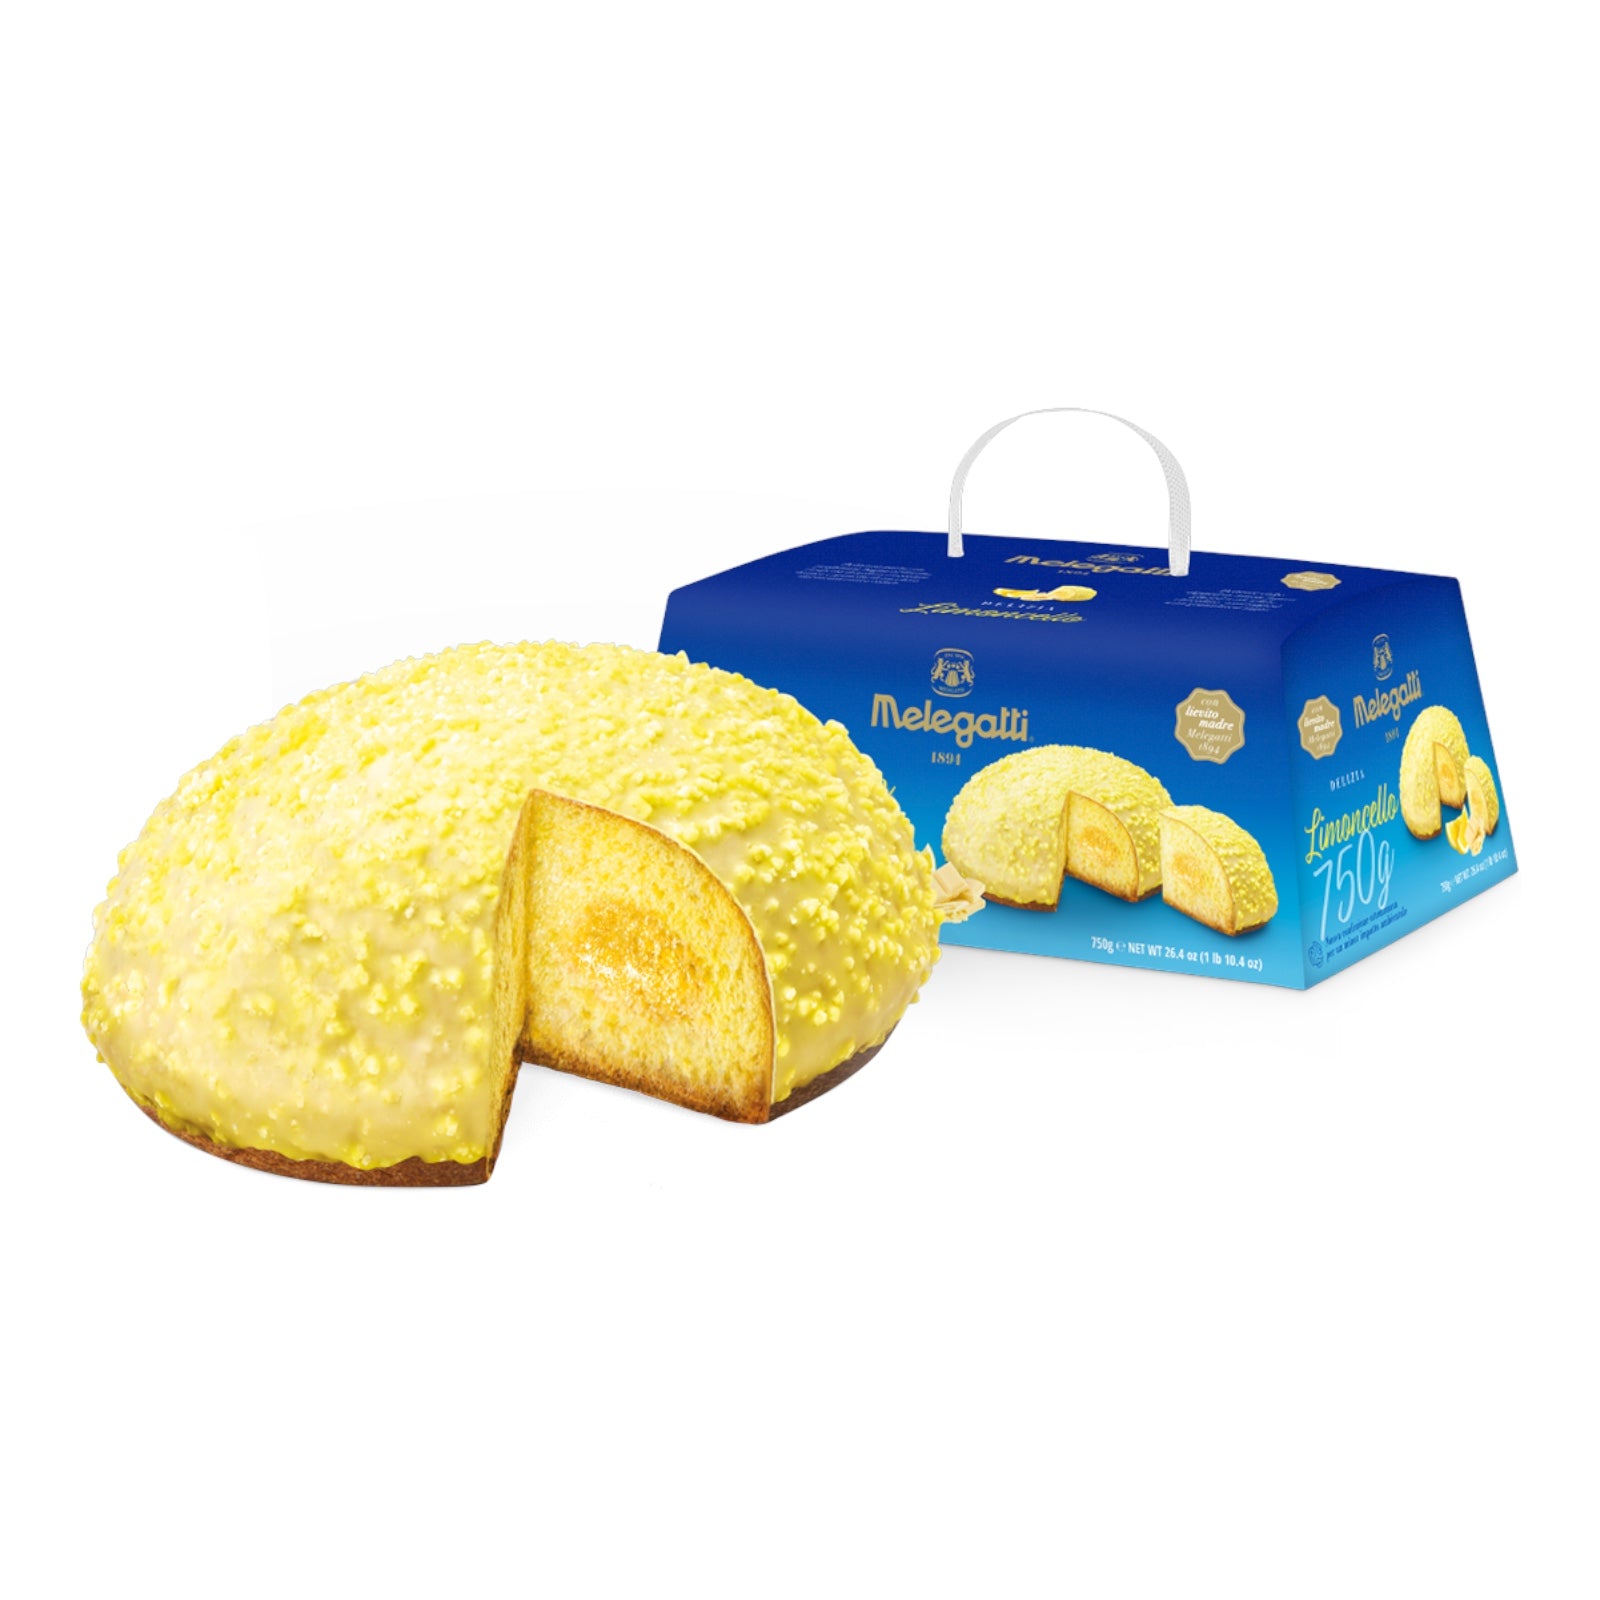 Tre Marie Panettone Milanese, 1 lb 10.5 oz, 750g is not halal